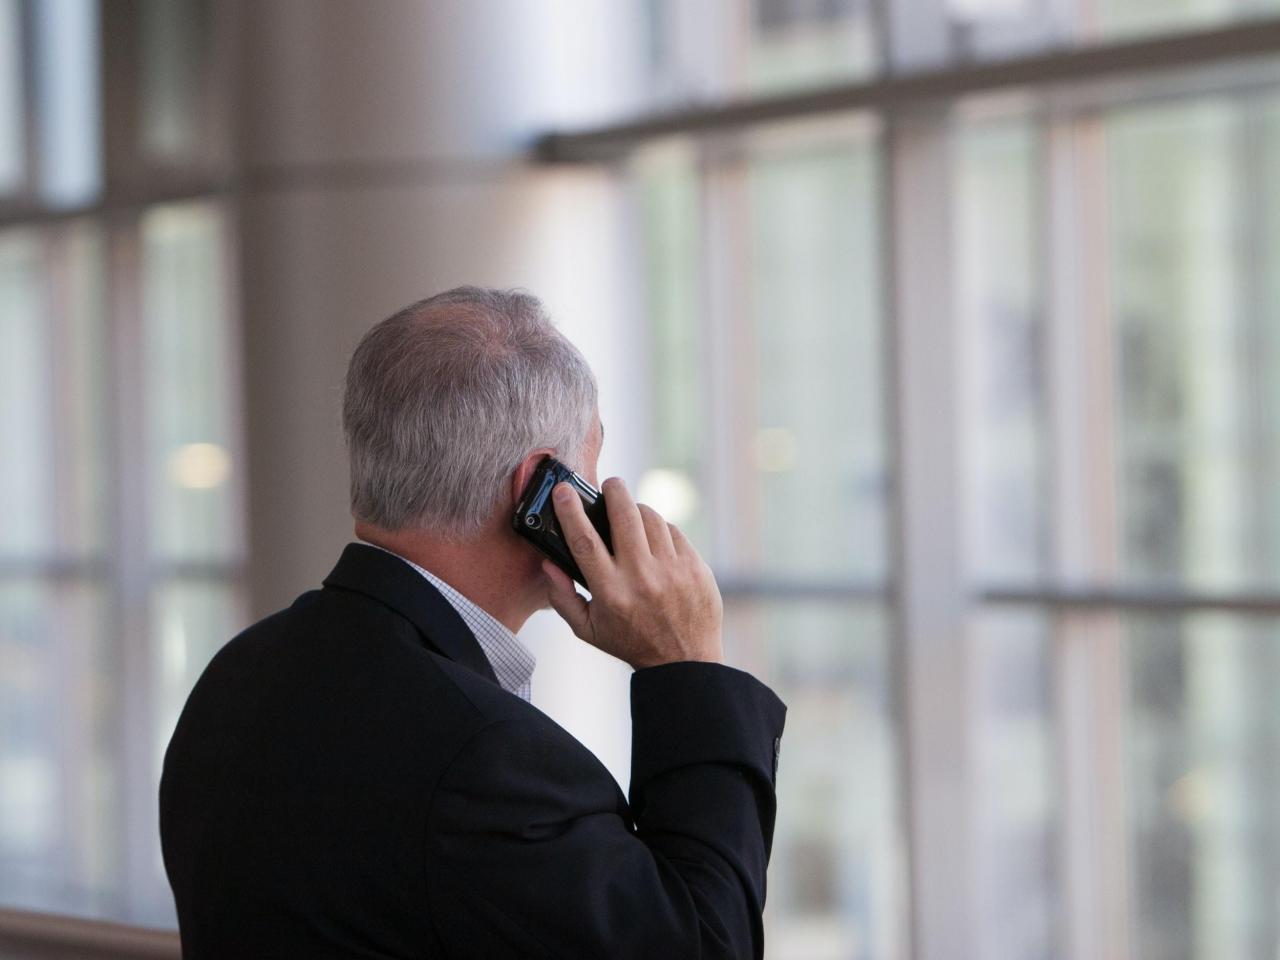 An employee receives a phone call from someone